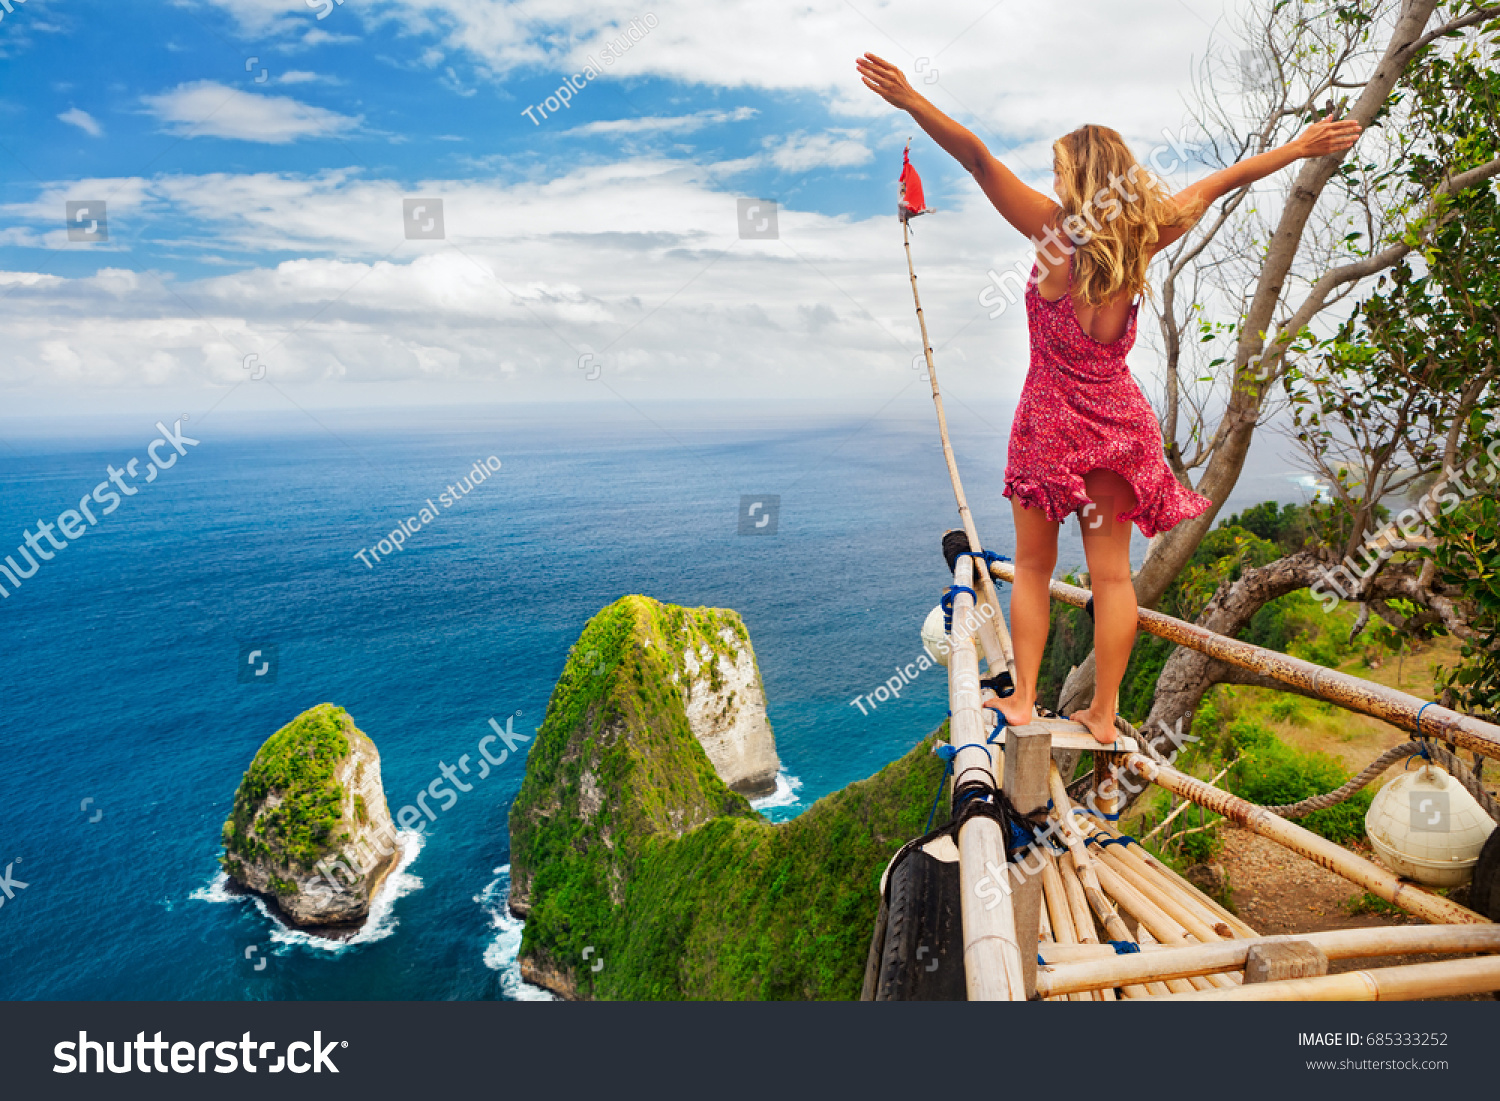 Family vacation lifestyle. Happy woman with raised in air hand stand at viewpoint. Look at Kelingking beach under high cliff. Travel destination in Bali. Popular place to visit on Nusa Penida island. #685333252